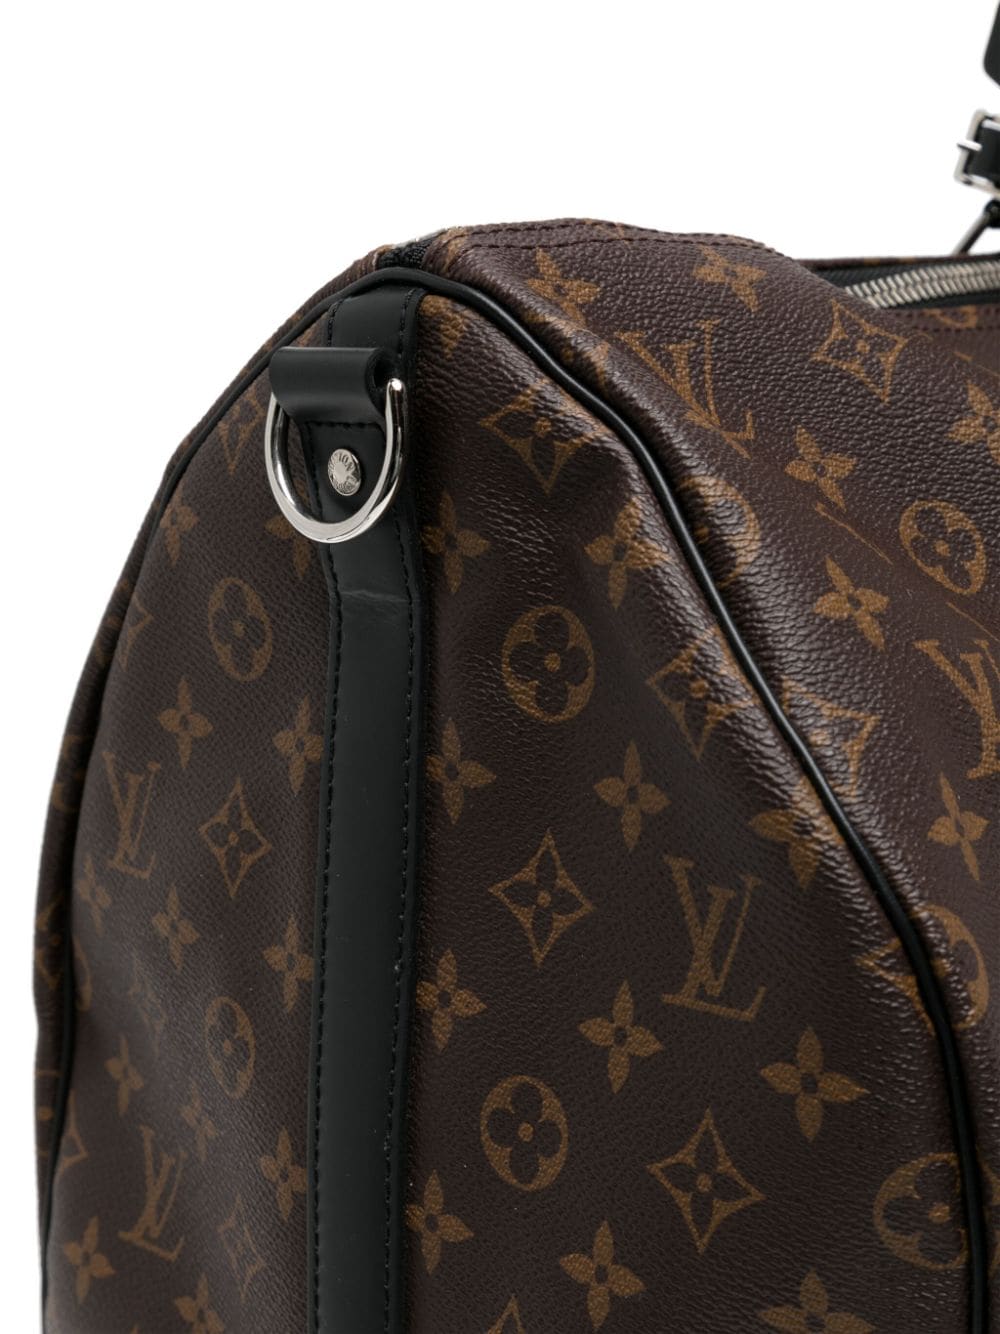 Louis Vuitton Pre-Owned Keepall 55 Bag Monogram at